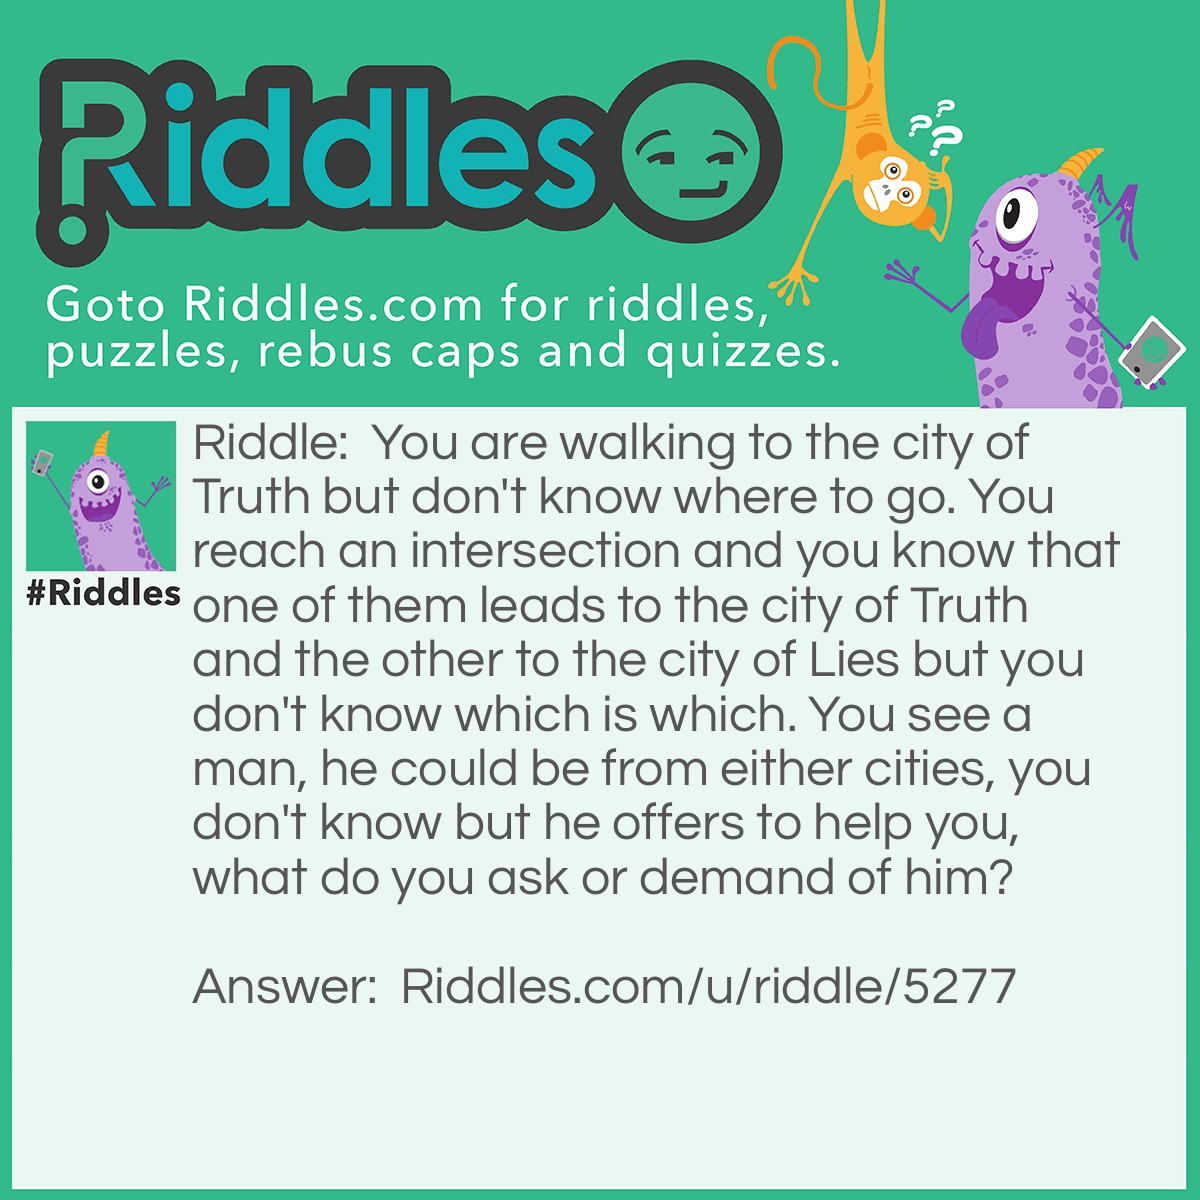 Riddle: You are walking to the city of Truth but don't know where to go. You reach an intersection and you know that one of them leads to the city of Truth and the other to the city of Lies but you don't know which is which. You see a man, he could be from either cities, you don't know but he offers to help you, what do you ask or demand of him? Answer: 'Take me to your home!' You say.